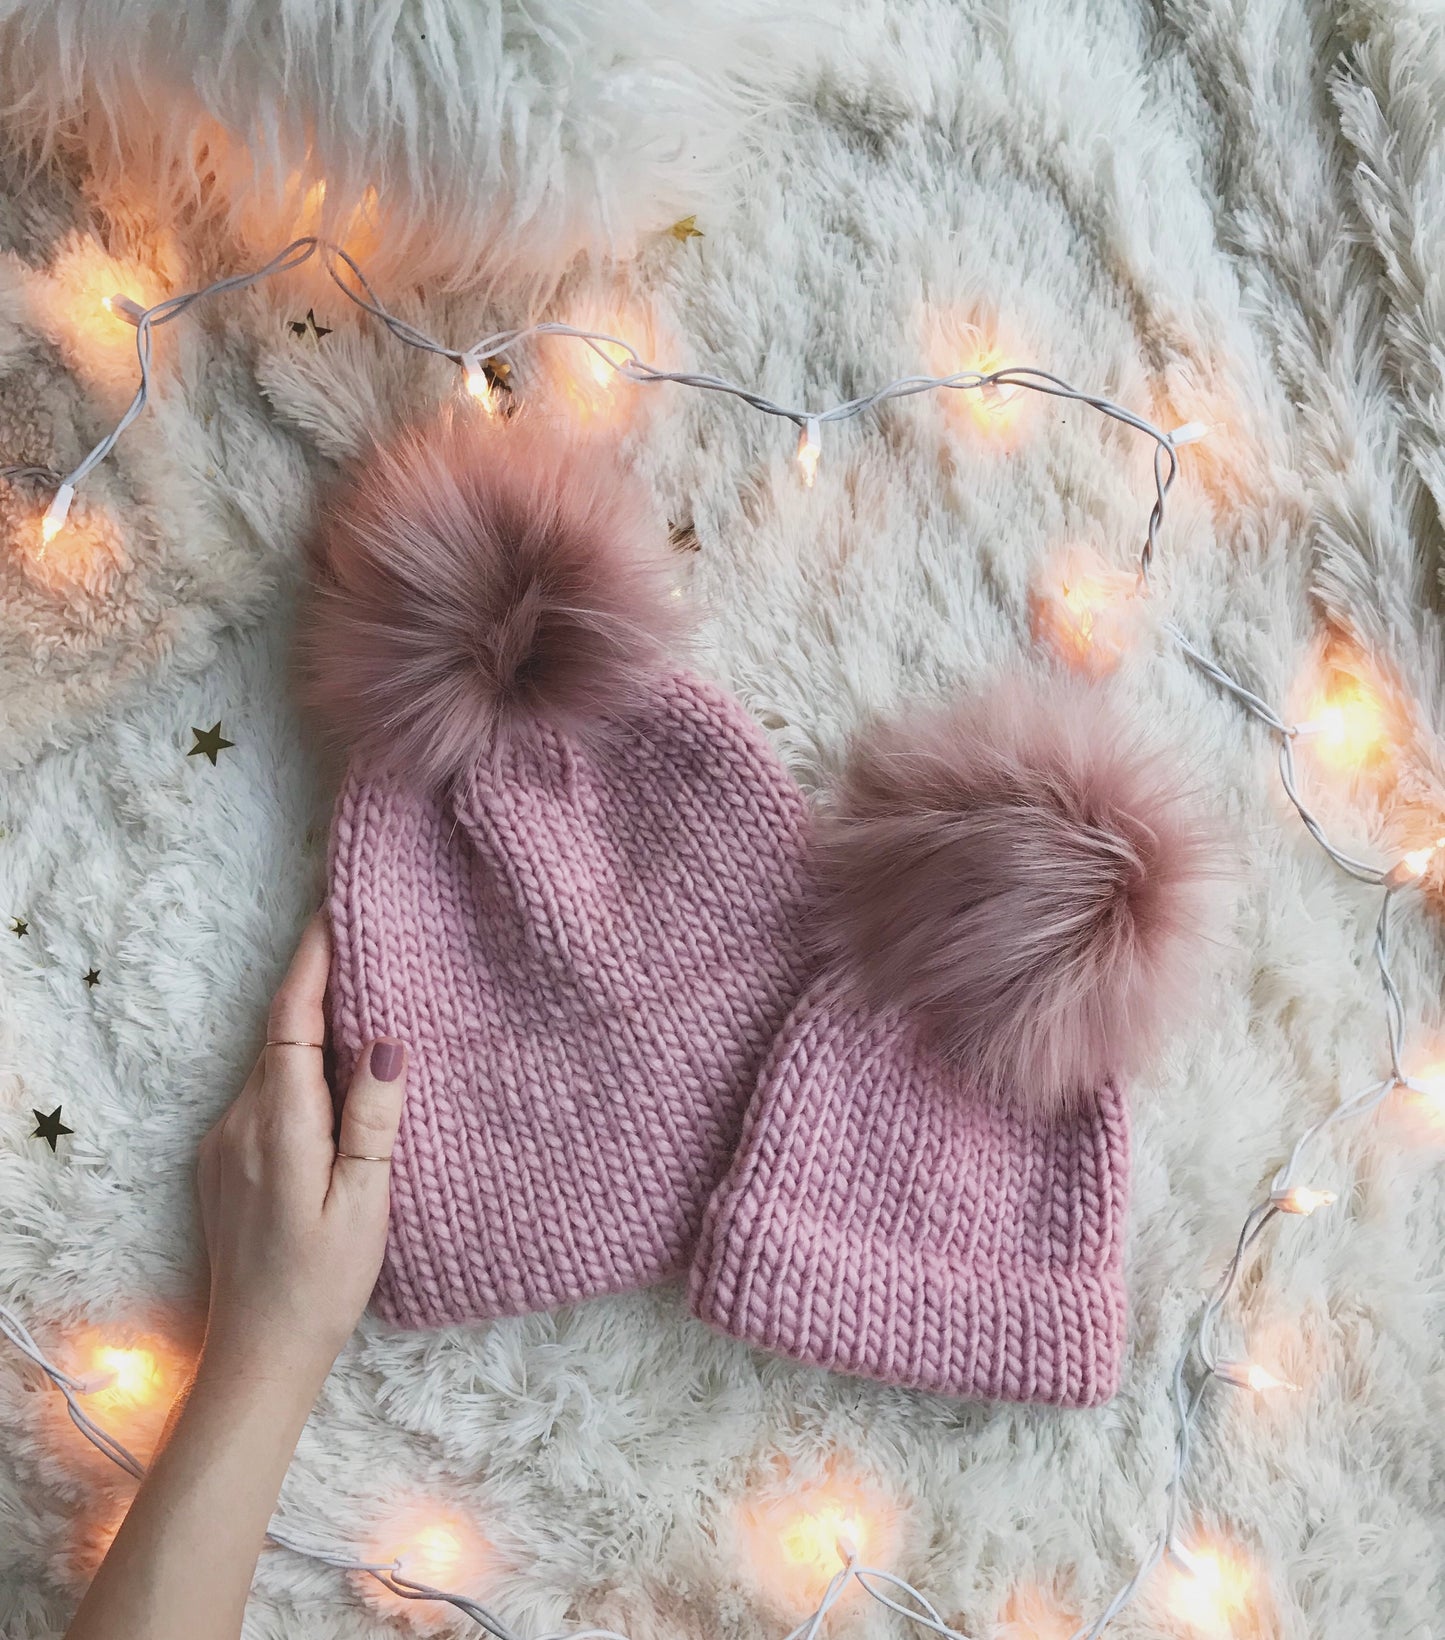 Rosé Mommy and Me Hats Double Brim Beanies with Pink Moscato Faux Fur Pom Pom